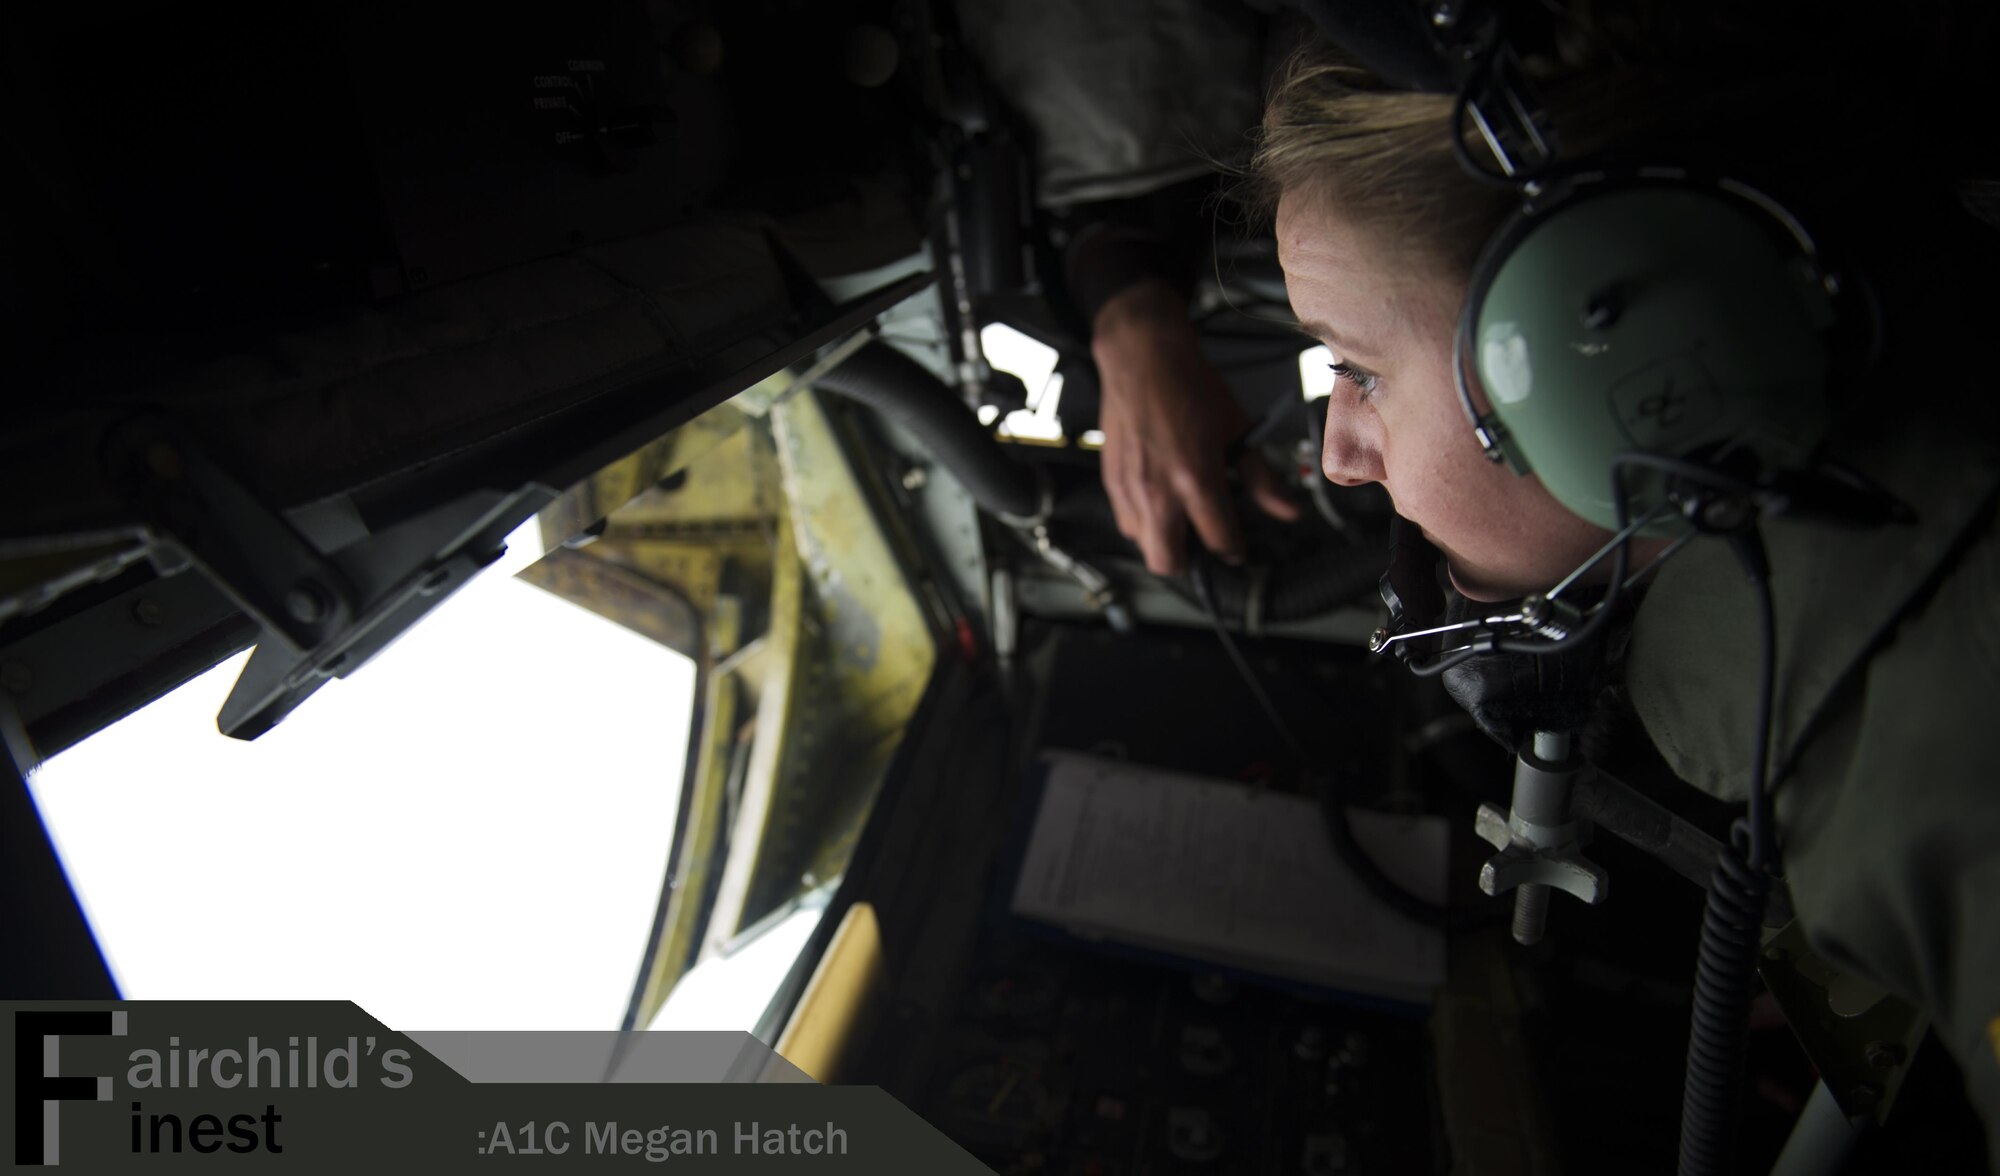 Airman 1st Class Megan Hatch, 93rd Air Refueling Squadron boom operator, refuels an airplane April 5, 2016, over Washington State. Her leadership selected her as one of Fairchild’s Finest, a weekly recognition program that highlights top-performing Airmen. (U.S. Air Force photo/Airman 1st Class Sean Campbell)